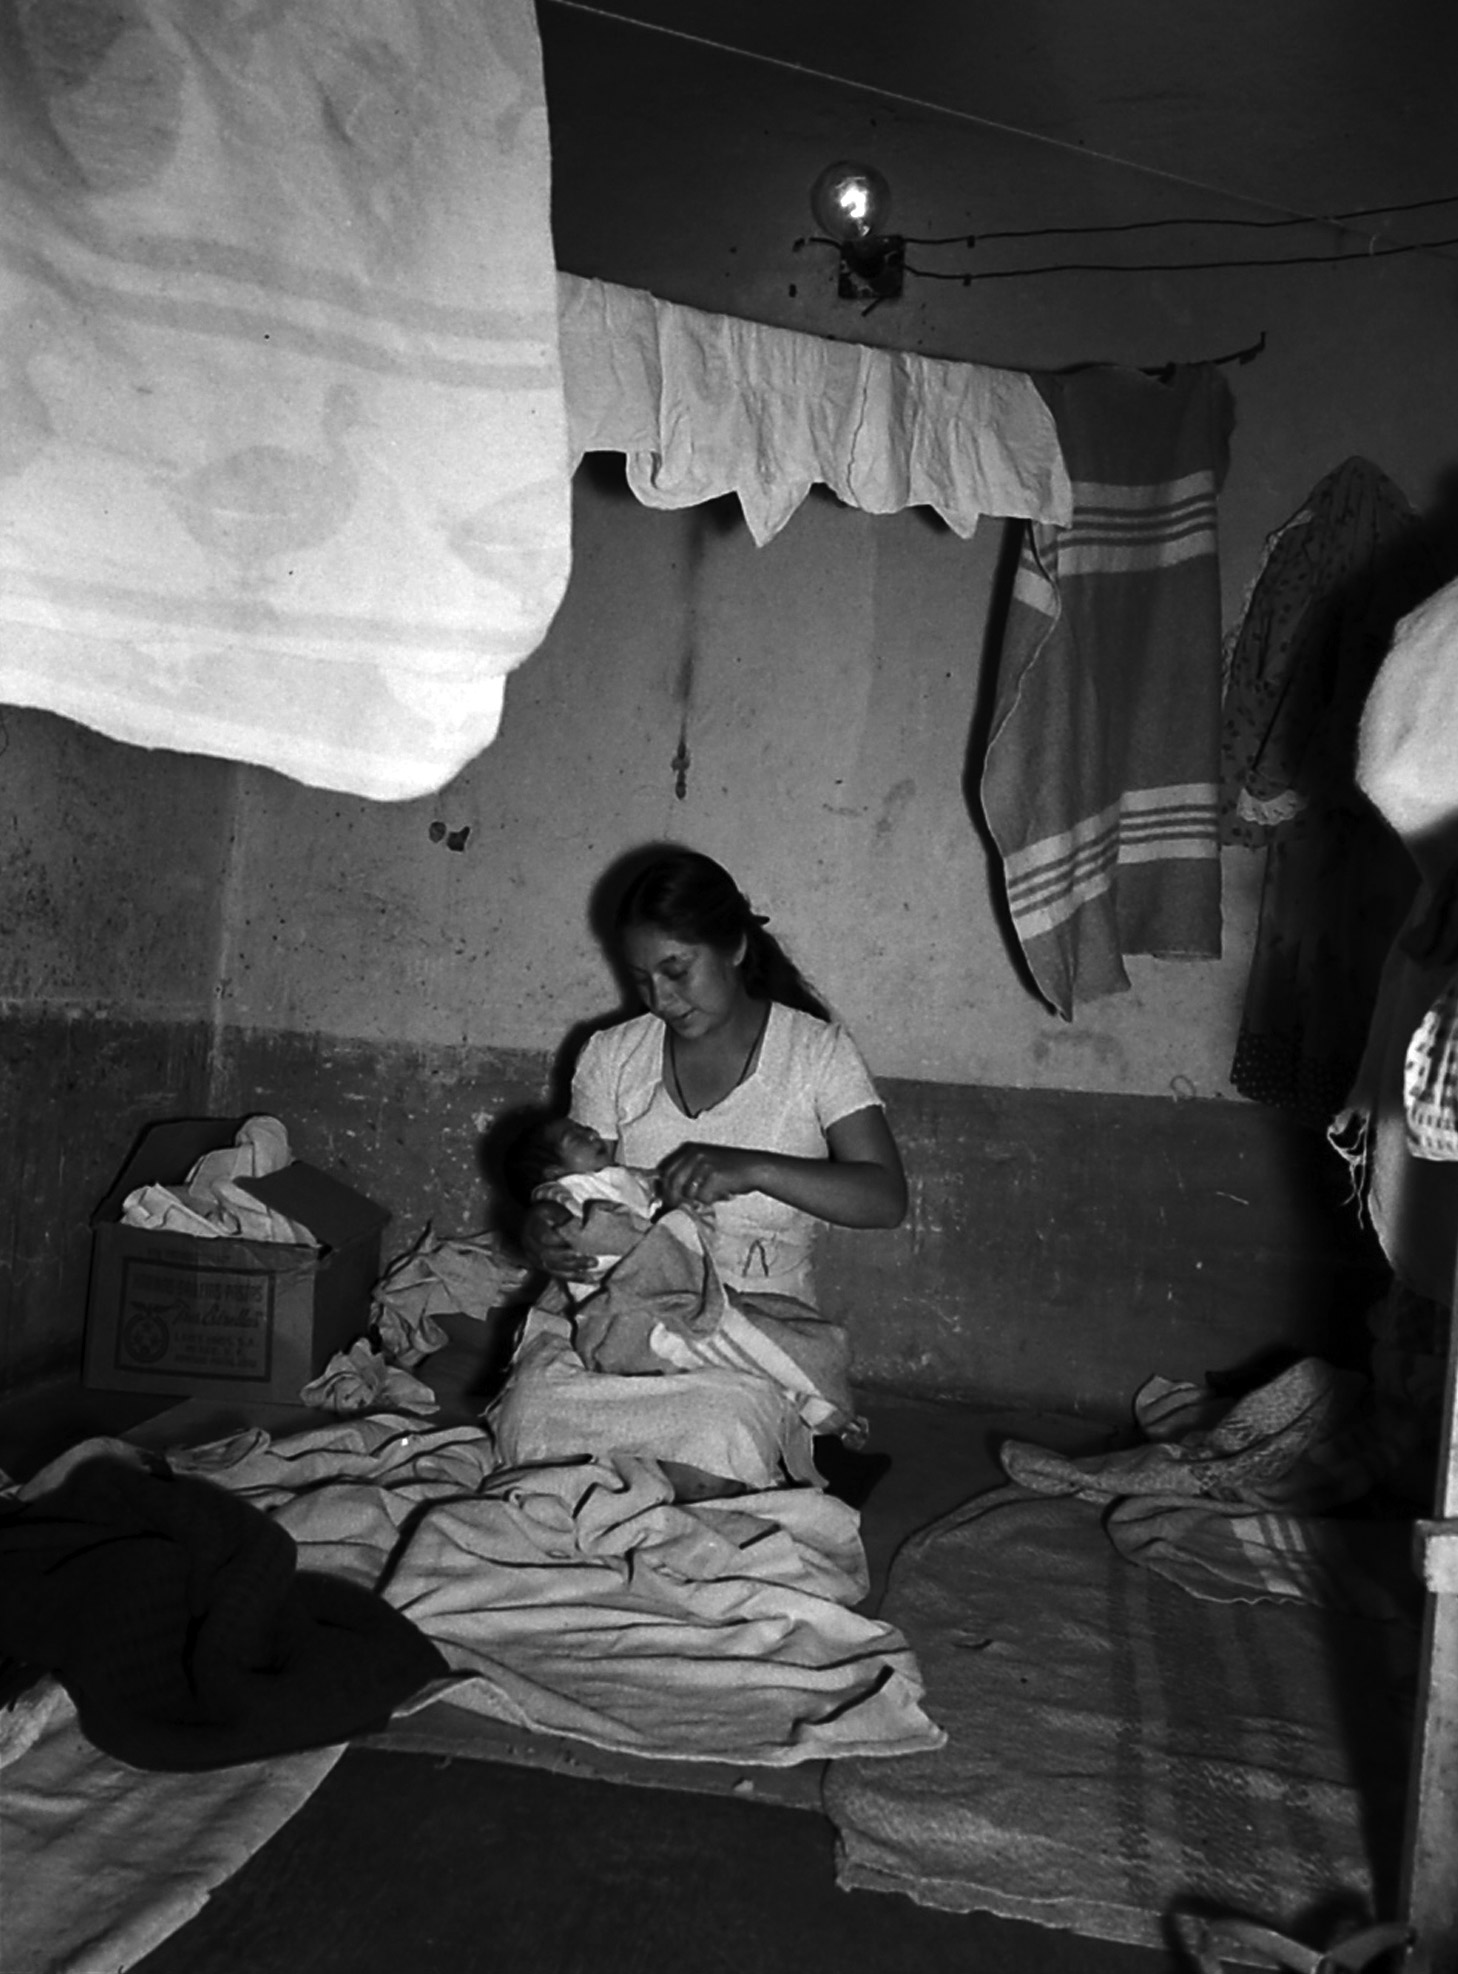 Inside the Black Palace prison in Mexico, 1950.